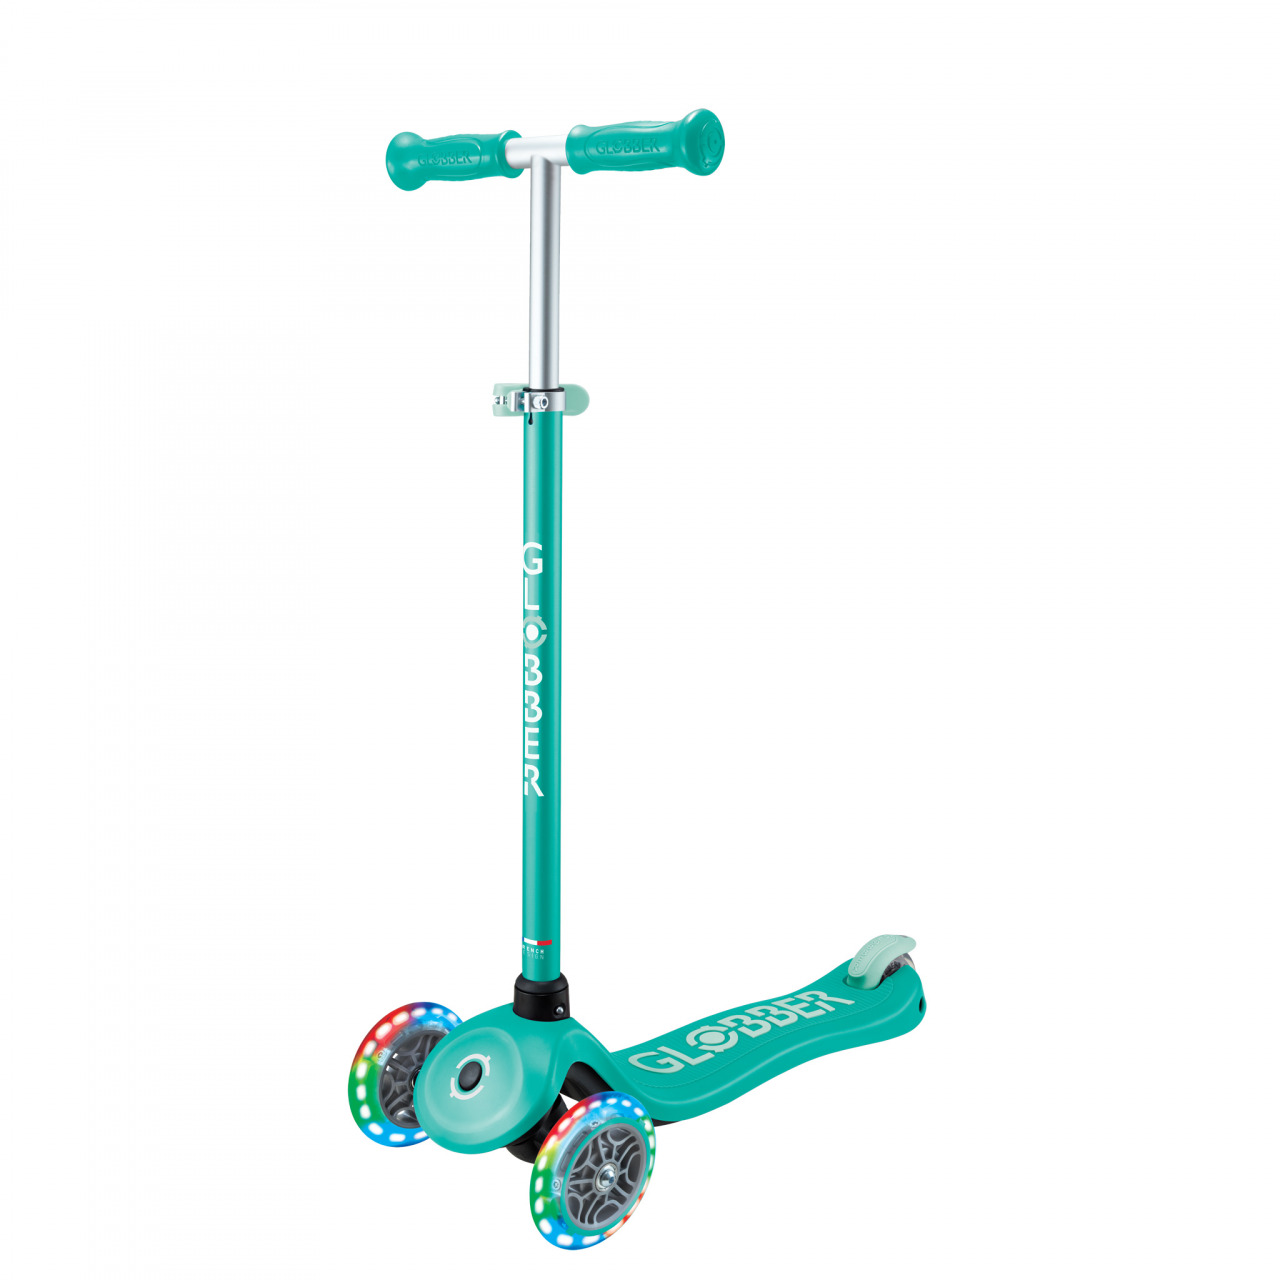 442 607 4 Light Scooter For 3 Year Old